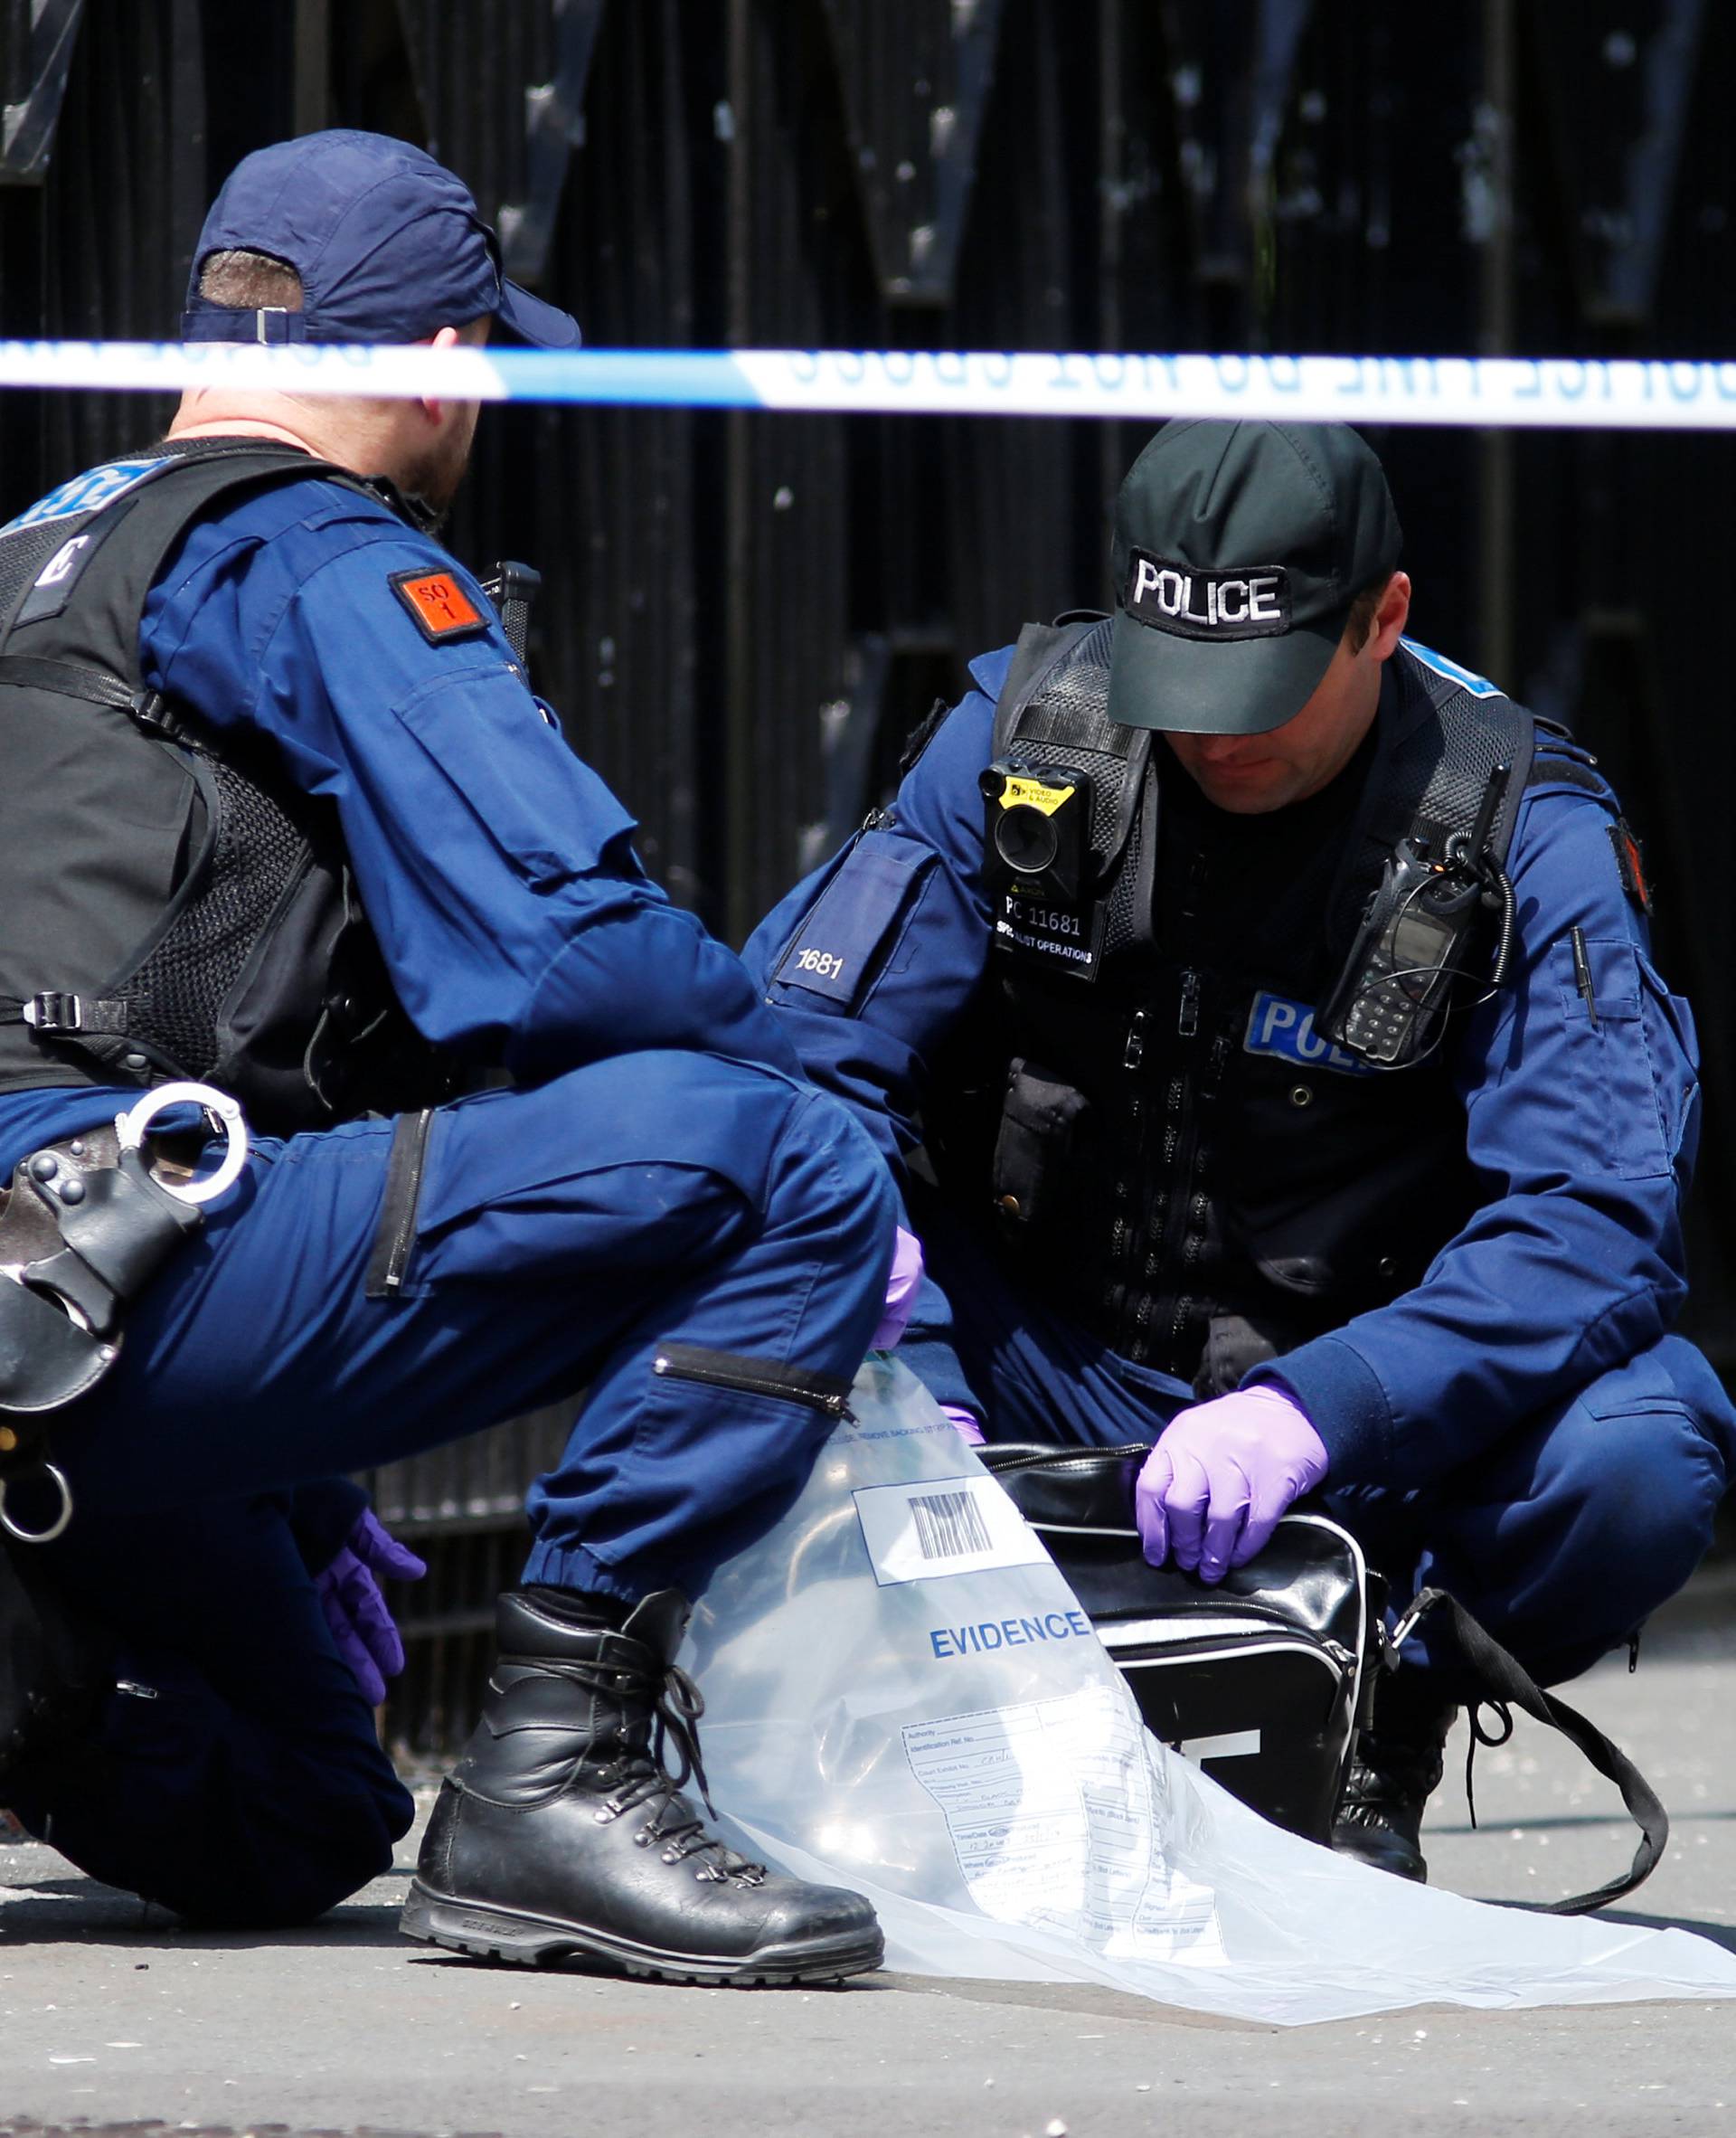 Police officers search a Nike bag in Hulme, Manchester